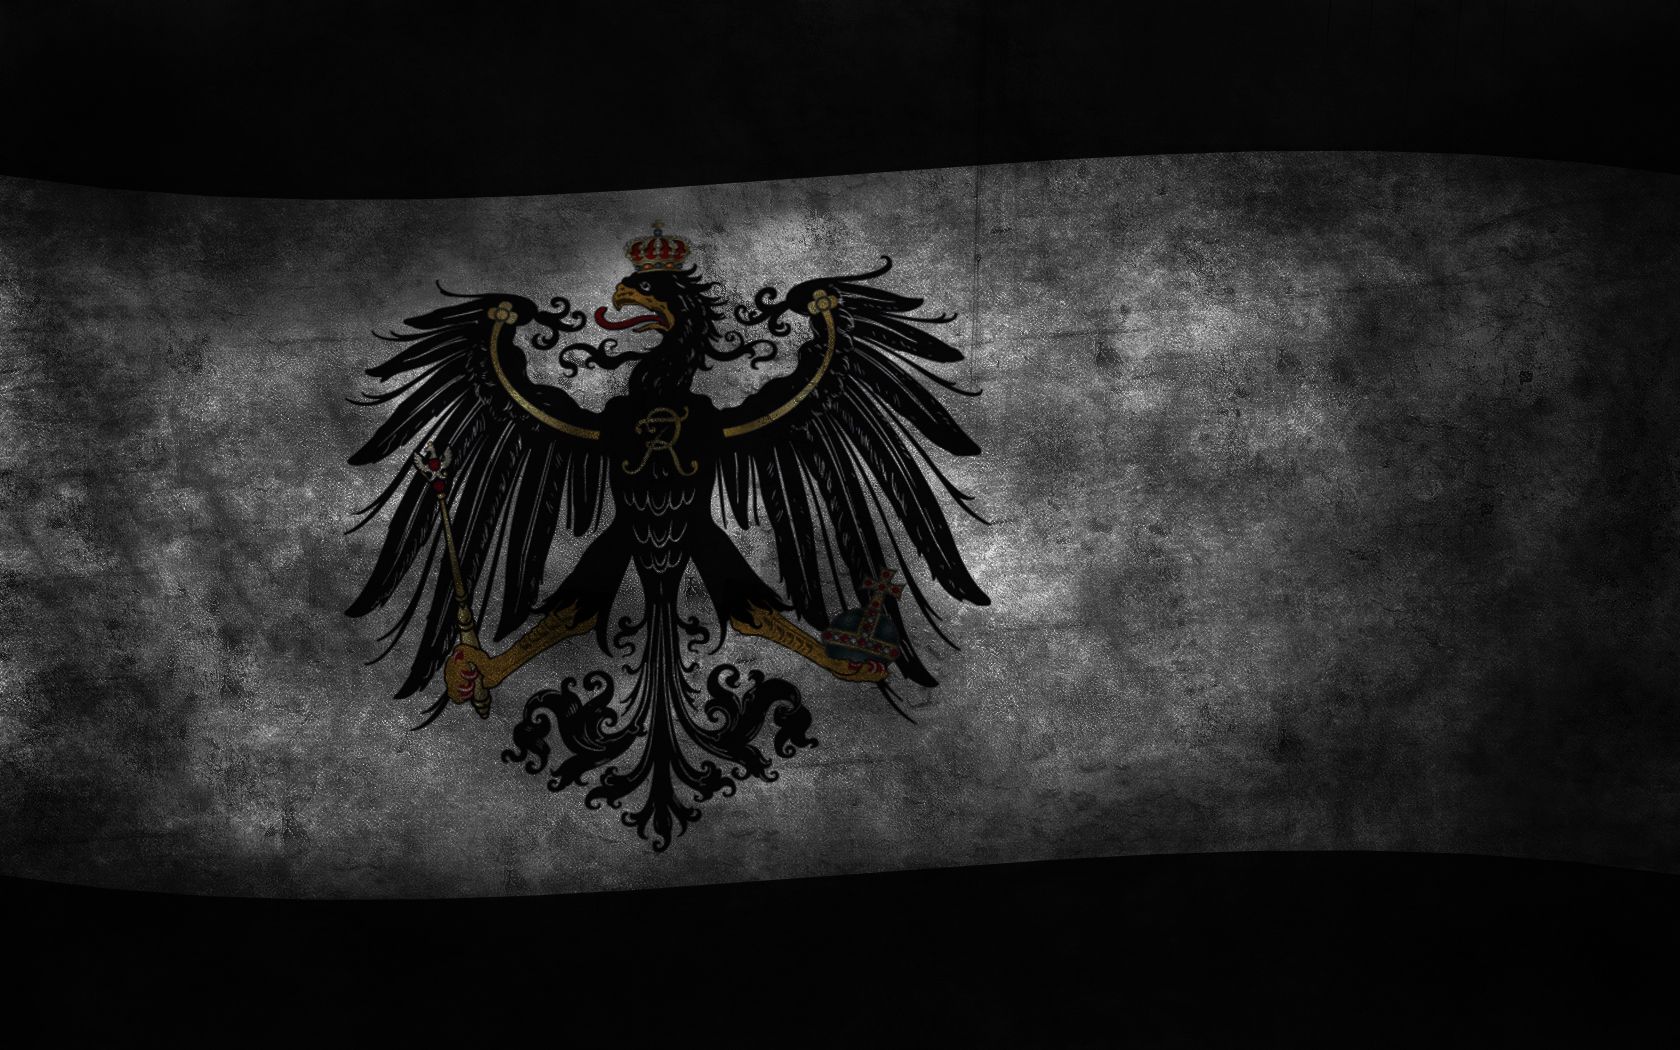 I have a thing for Prussia. - added by f*ckya